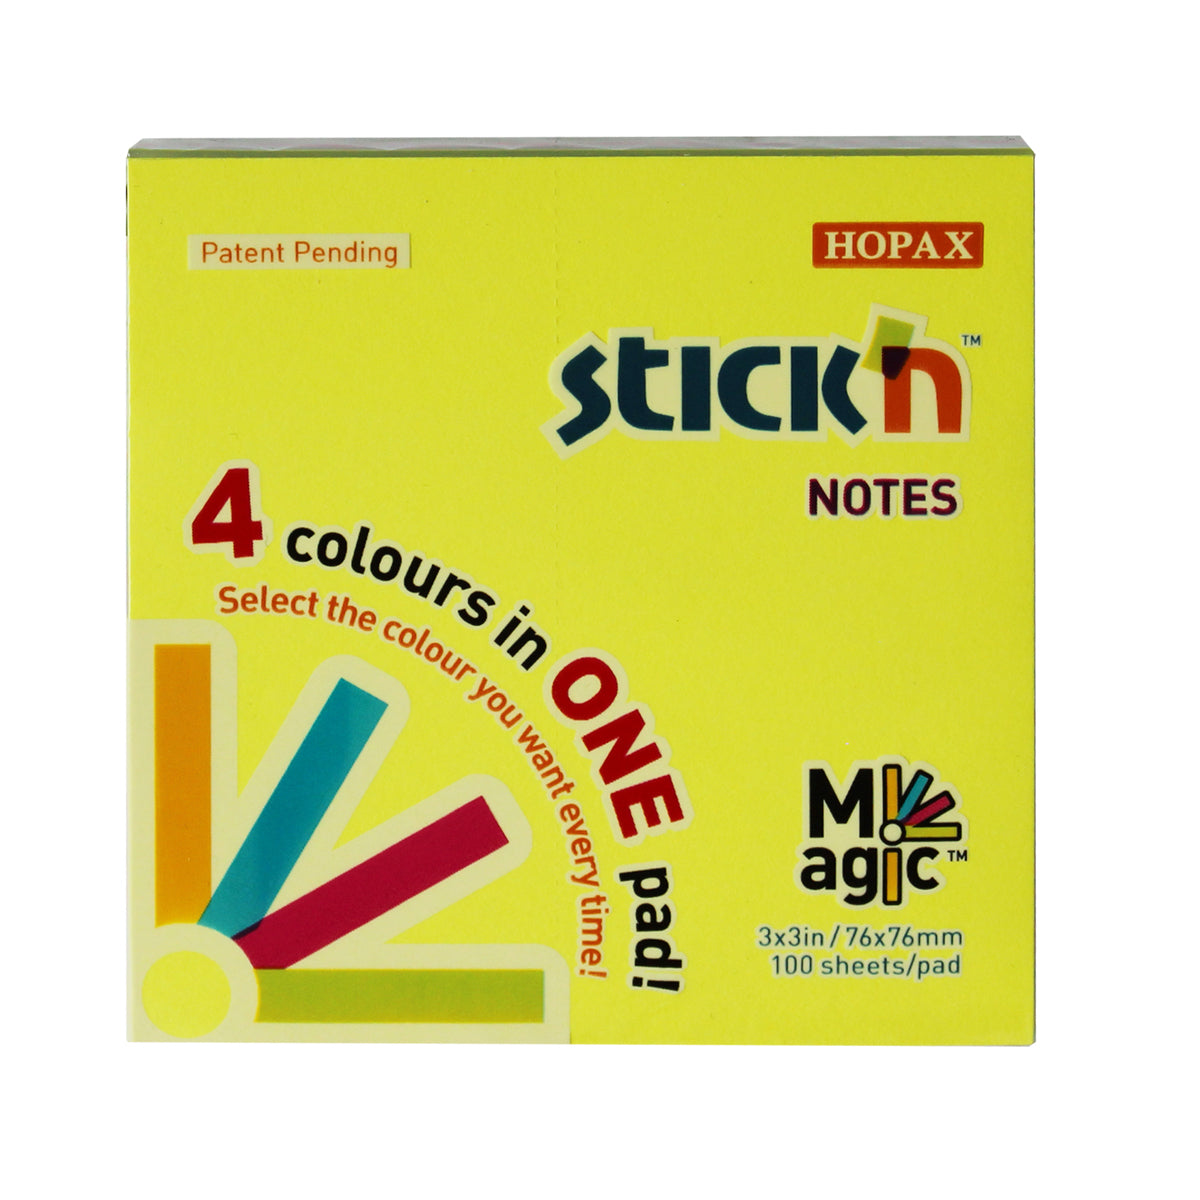 Packaged Stick'n Notes Magic Pad, with the text '4 colours in ONE pad' and the product name. It specifies the pad size as 3x3in (76x76mm) with 100 sheets per pad, and the logo 'HOPAX' in white with a red background.